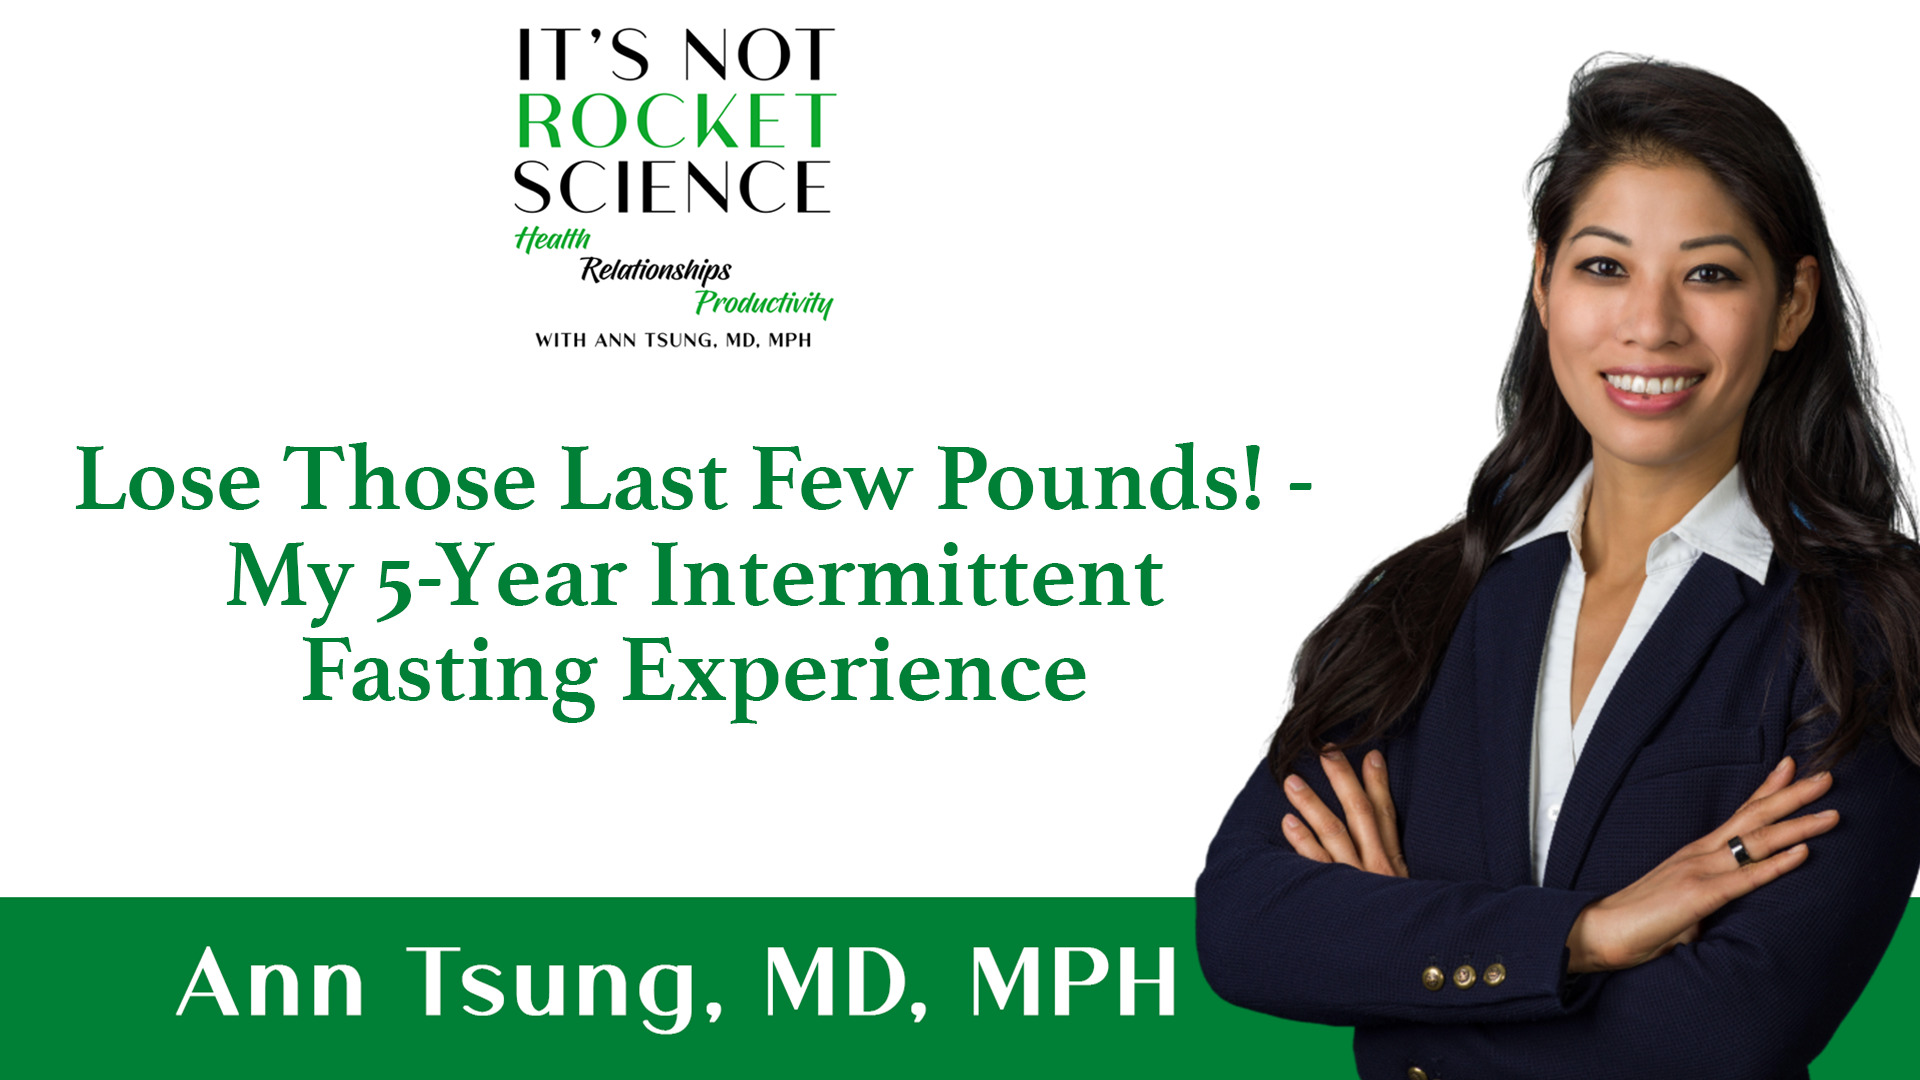 043. Lose Those Last Few Pounds! – My 5-Year Intermittent Fasting Experience